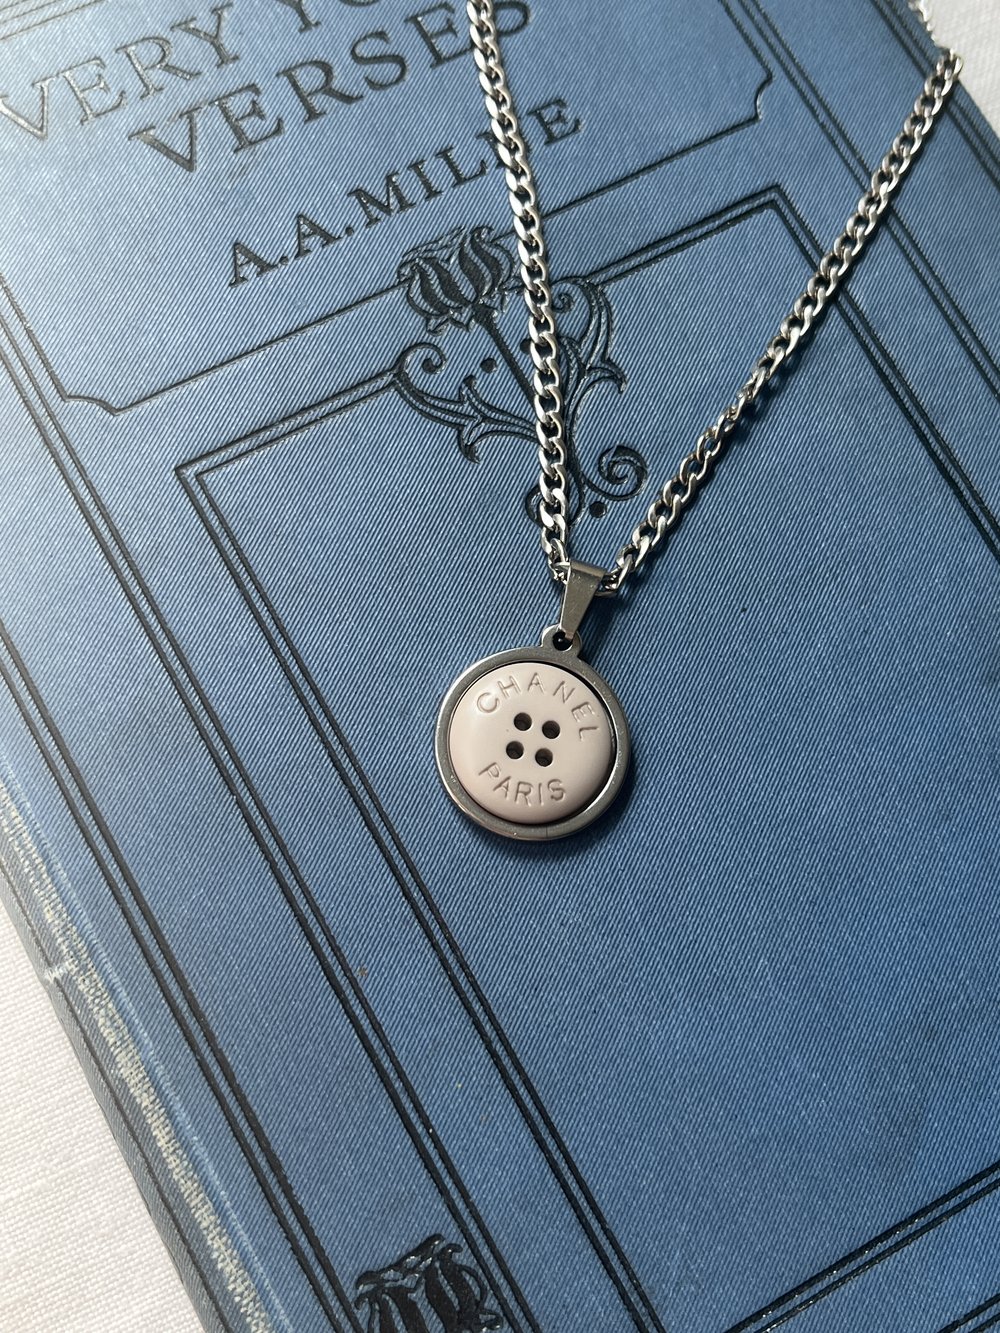 Chanel Red Reworked Vintage Button Necklace - $83 (83% Off Retail